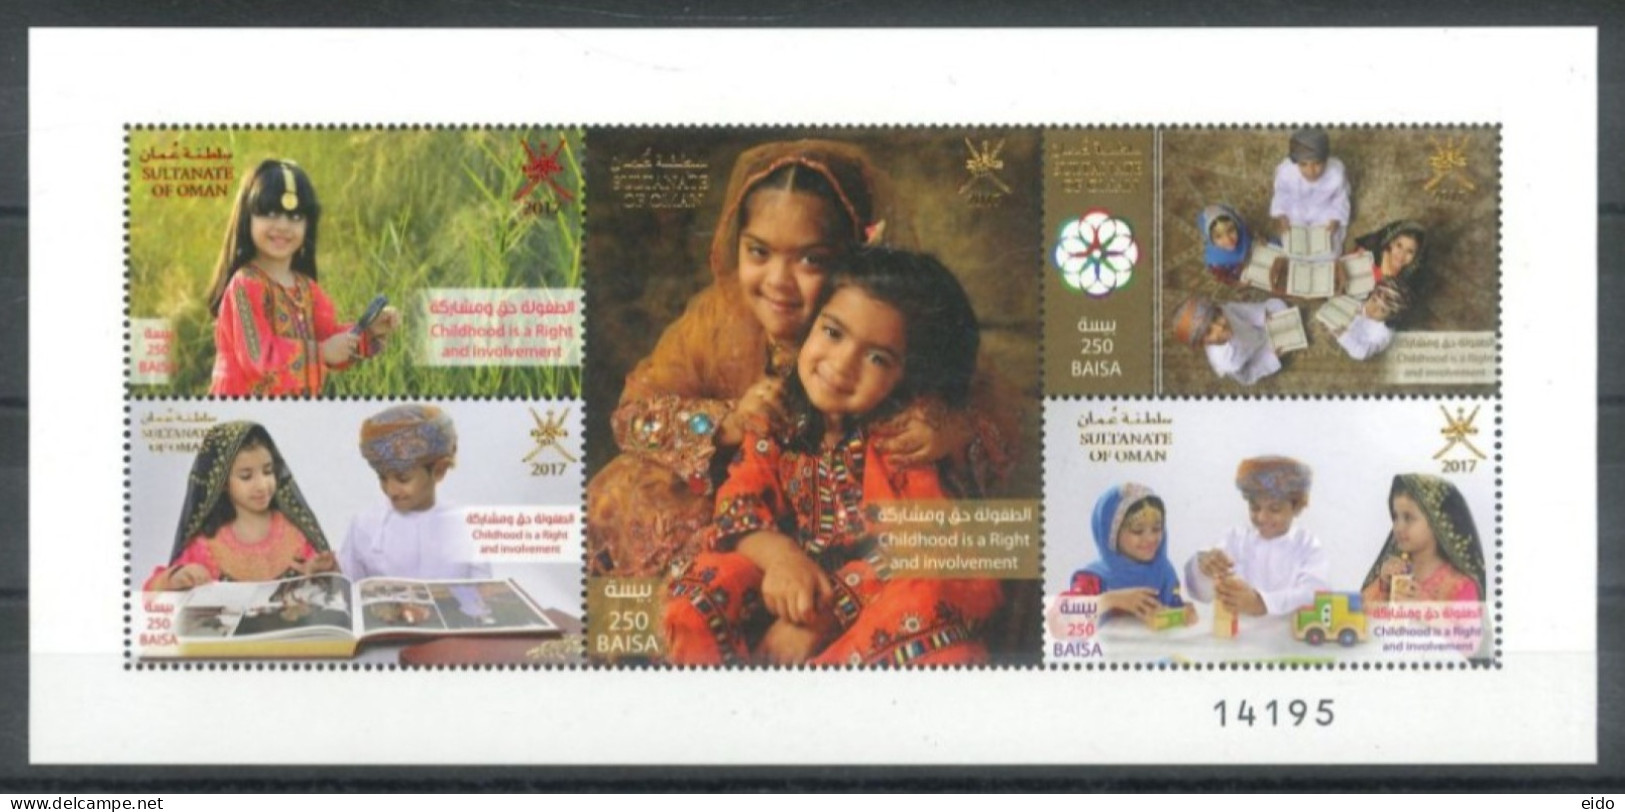 OMAN - 2017, STAMPS SHEET OF CHILDHOOD IS A RIGHT & INVOLVEMENT, UMM (**). - Oman